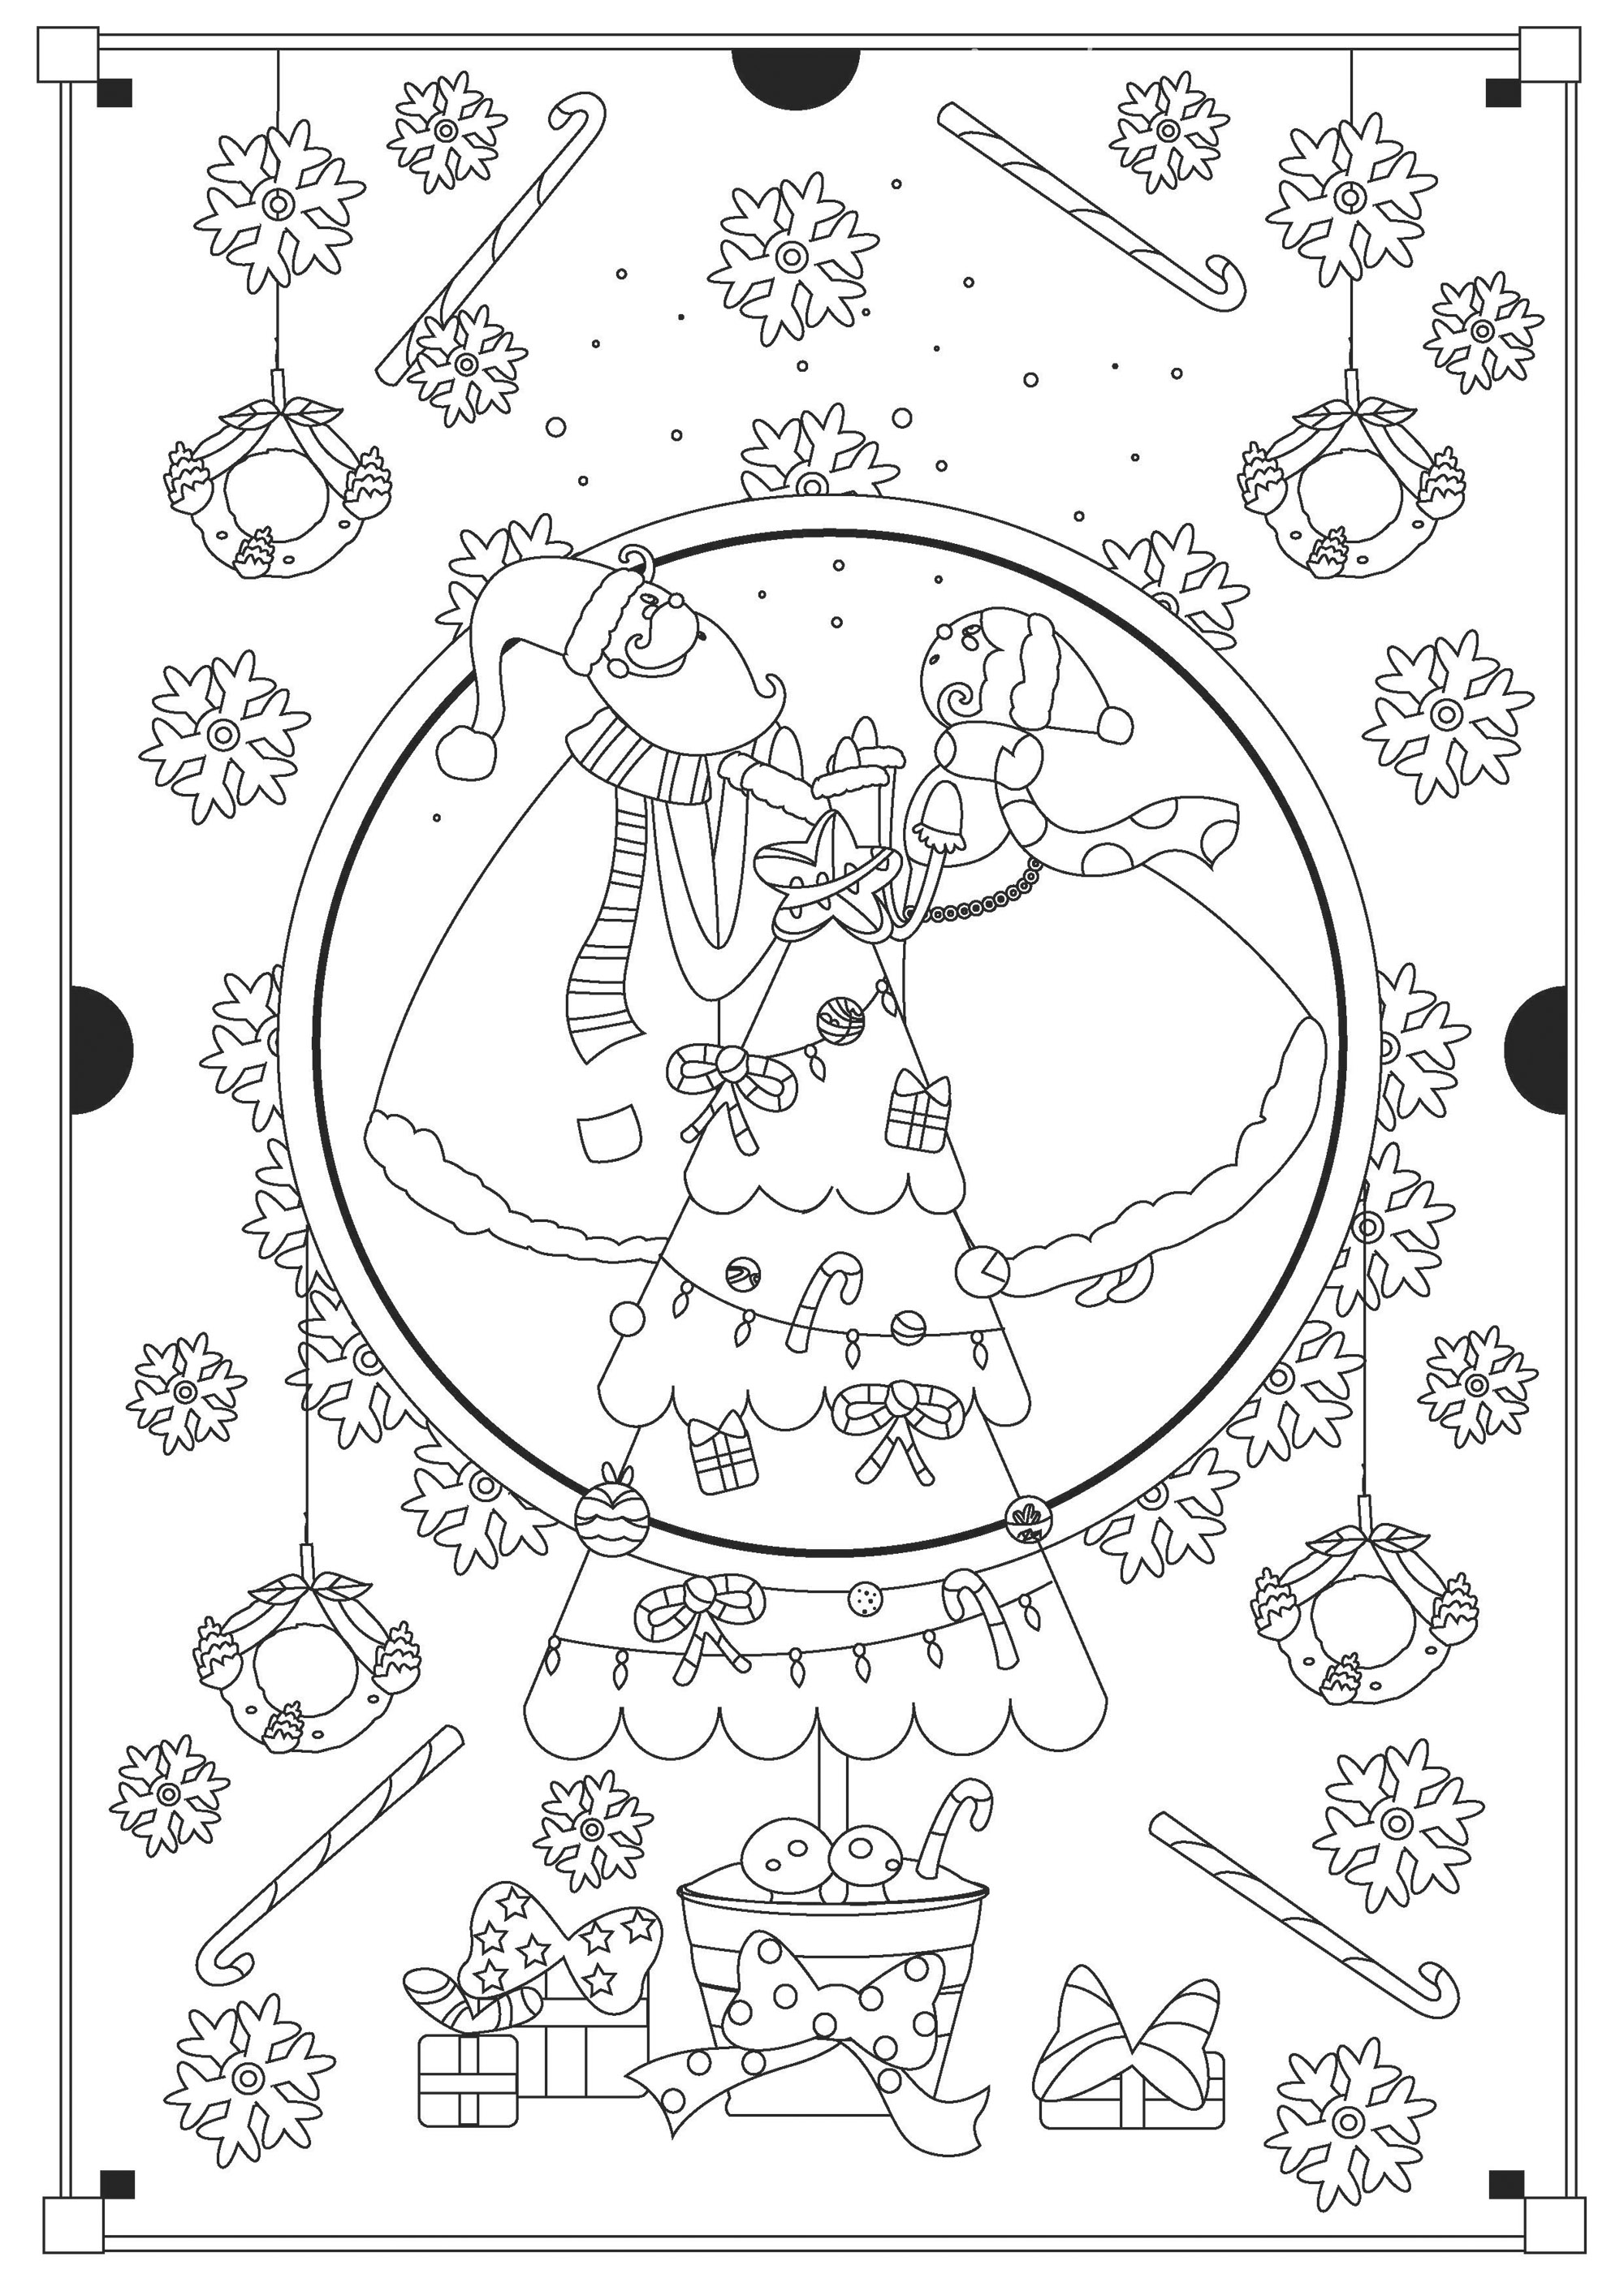 Christmas coloring pages with Santa and Mrs. Claus. Lots of Christmas objects to color around the characters and the pretty Christmas tree: gifts, candy, snowflakes, etc.., Artist : Gaelle Picard